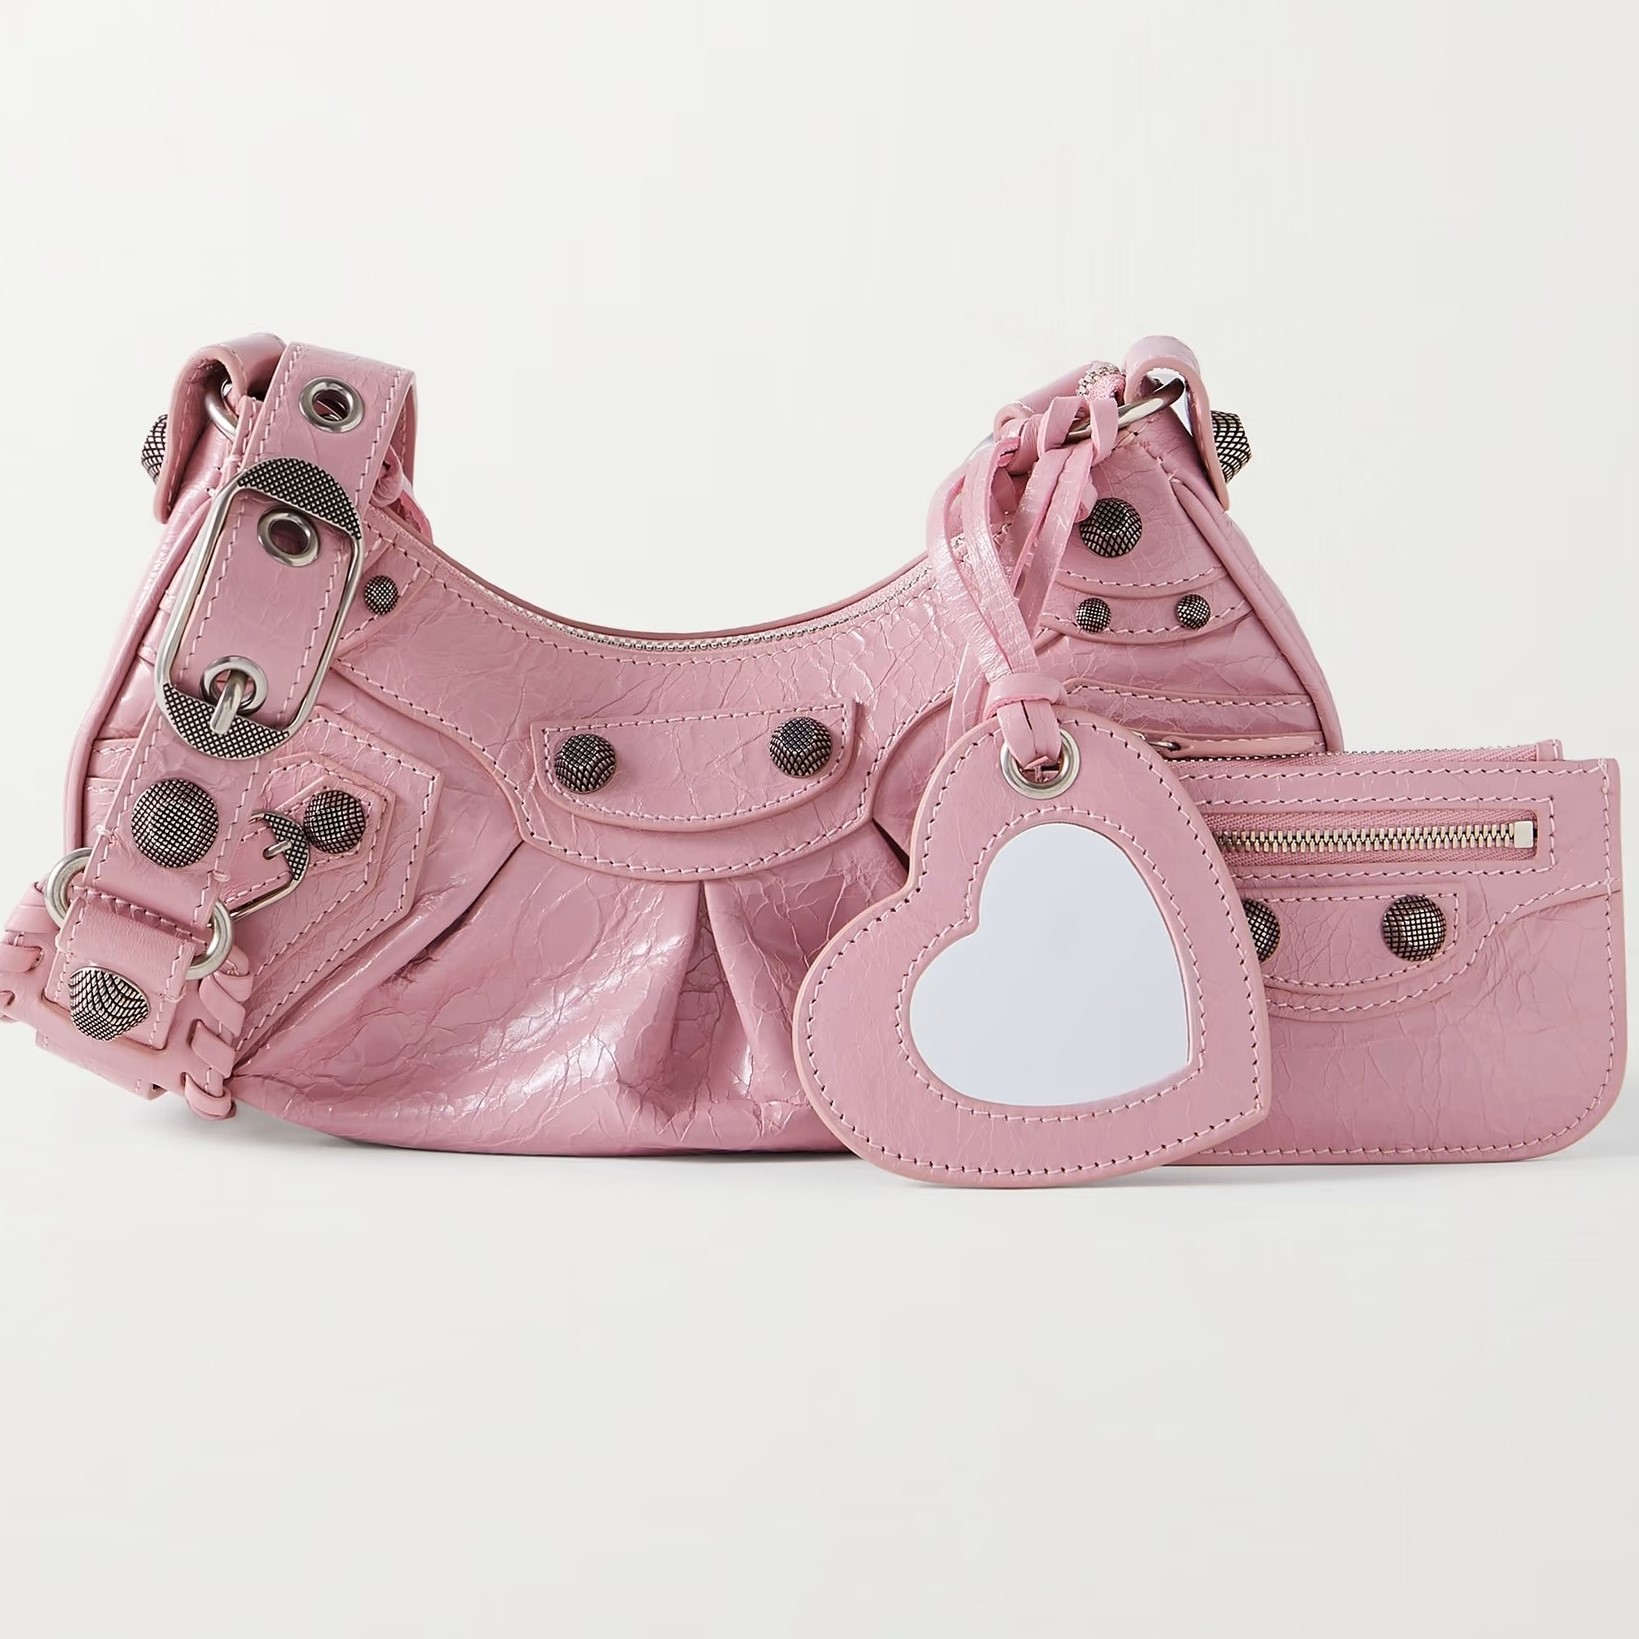 TÚI XÁCH NỮ BALENCIAGA PINK LE CAGOLE XS STUDDED CRINKLED LEATHER SHOULDER BAG 1